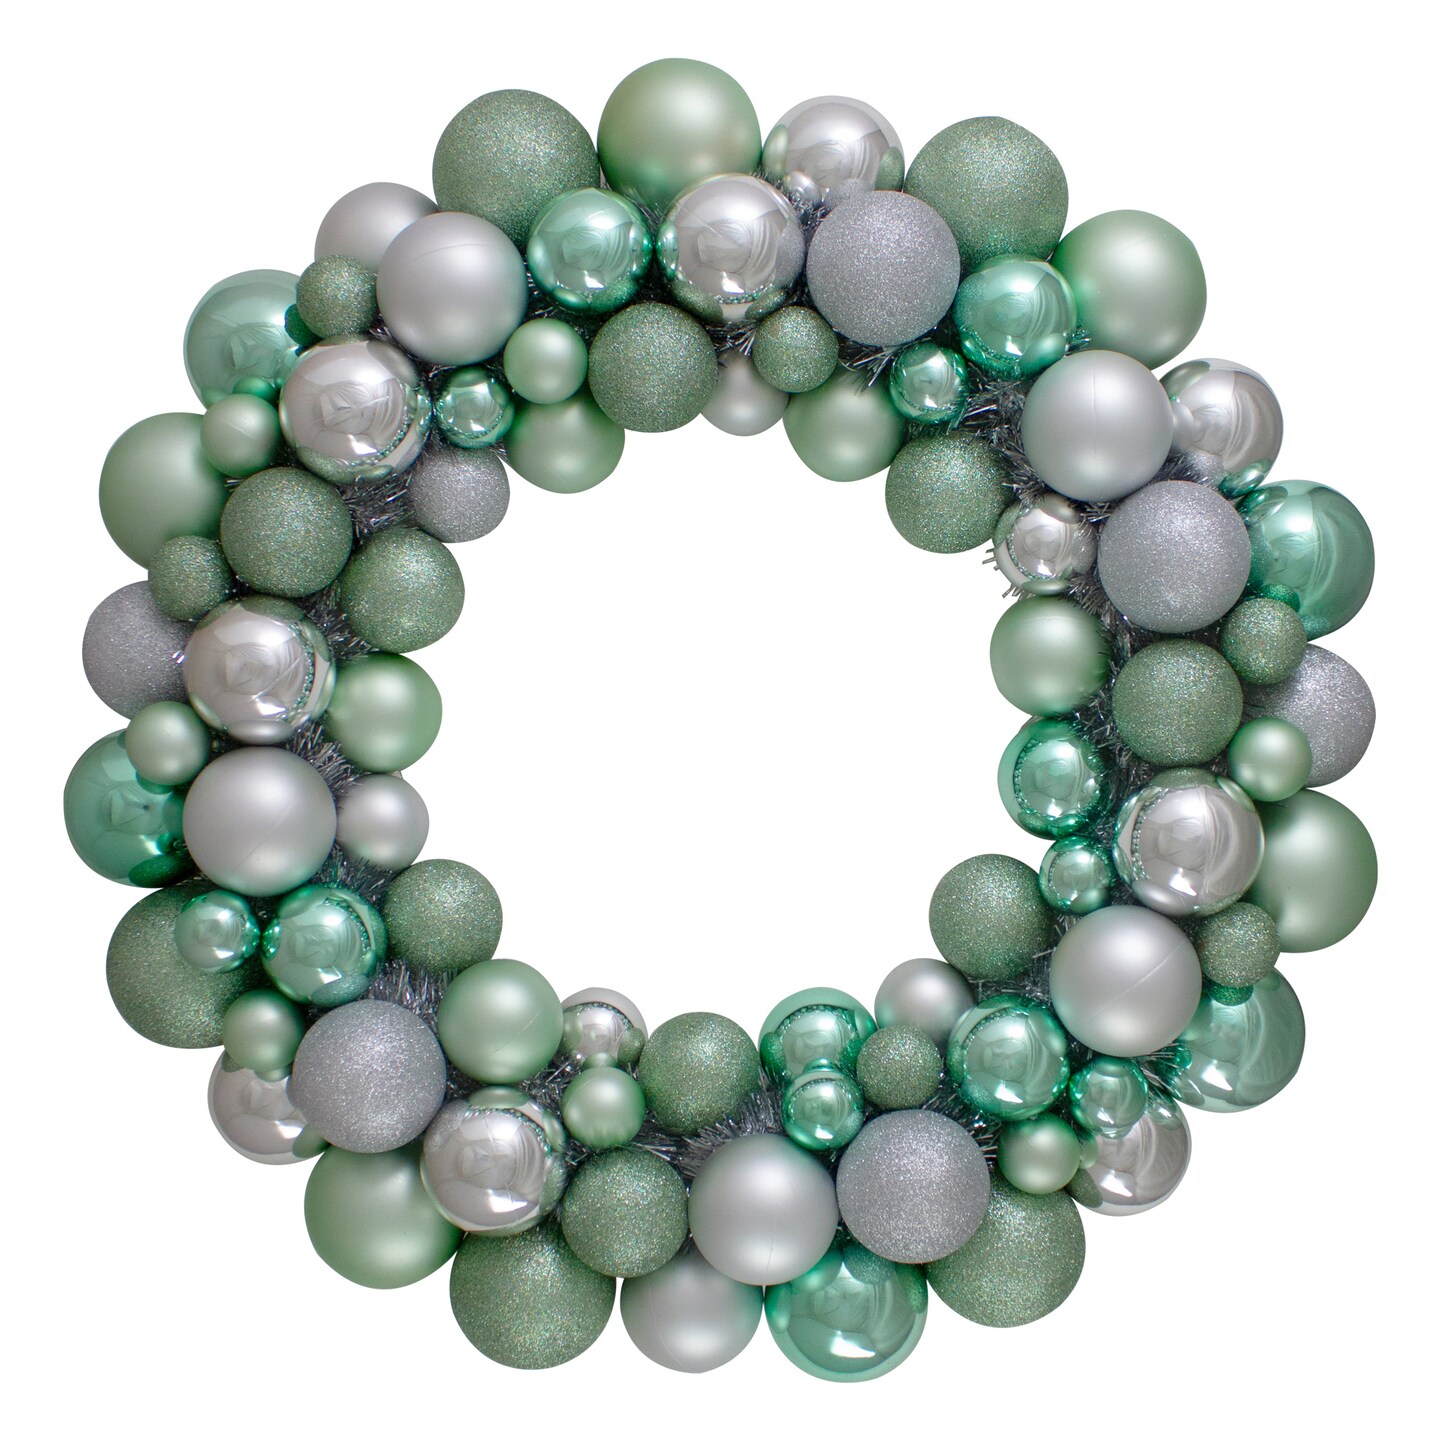 Northlight Silver and Seafoam Green 3-Finish Shatterproof Ball Christmas Wreath - 24-Inch, Unlit